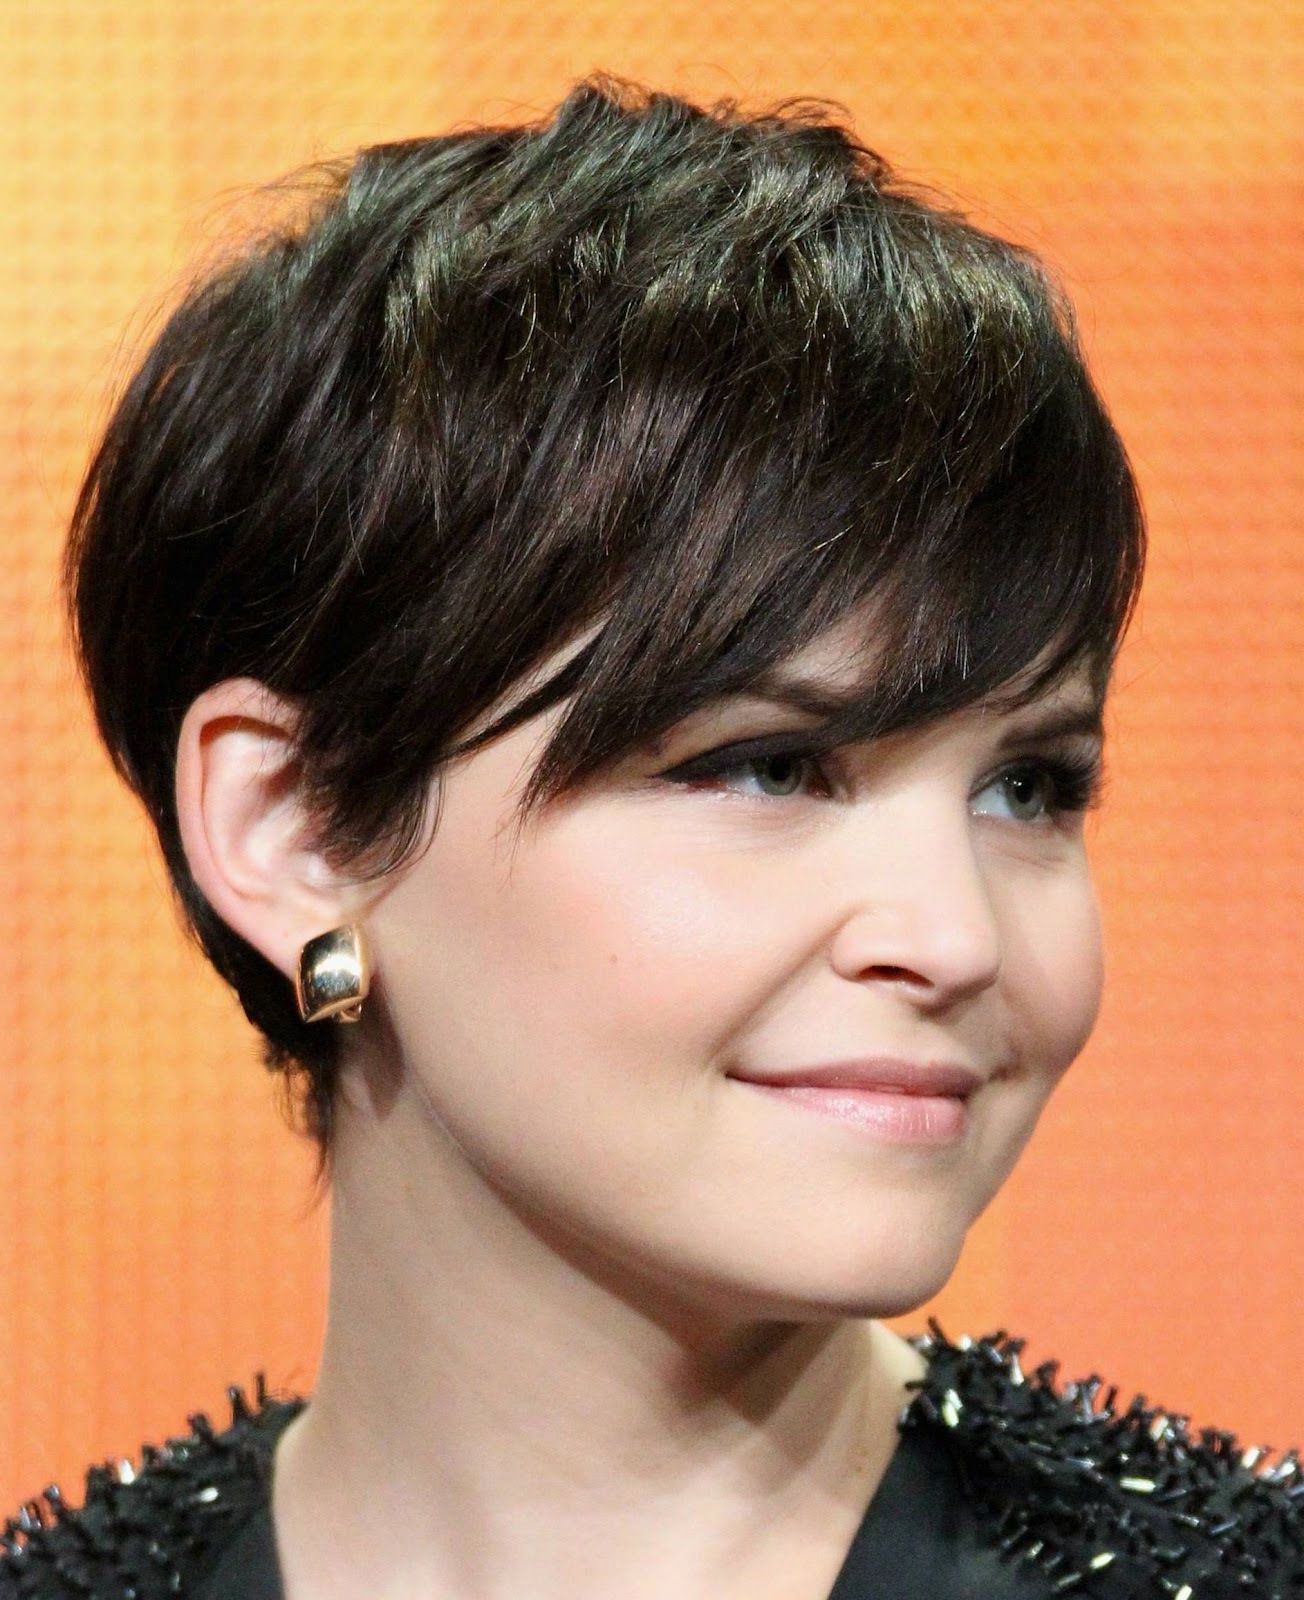 20 Stunning Looks With Pixie Cut For Round Face In 2018 | Haircuts With Short Haircuts With Bangs For Round Faces (View 12 of 25)